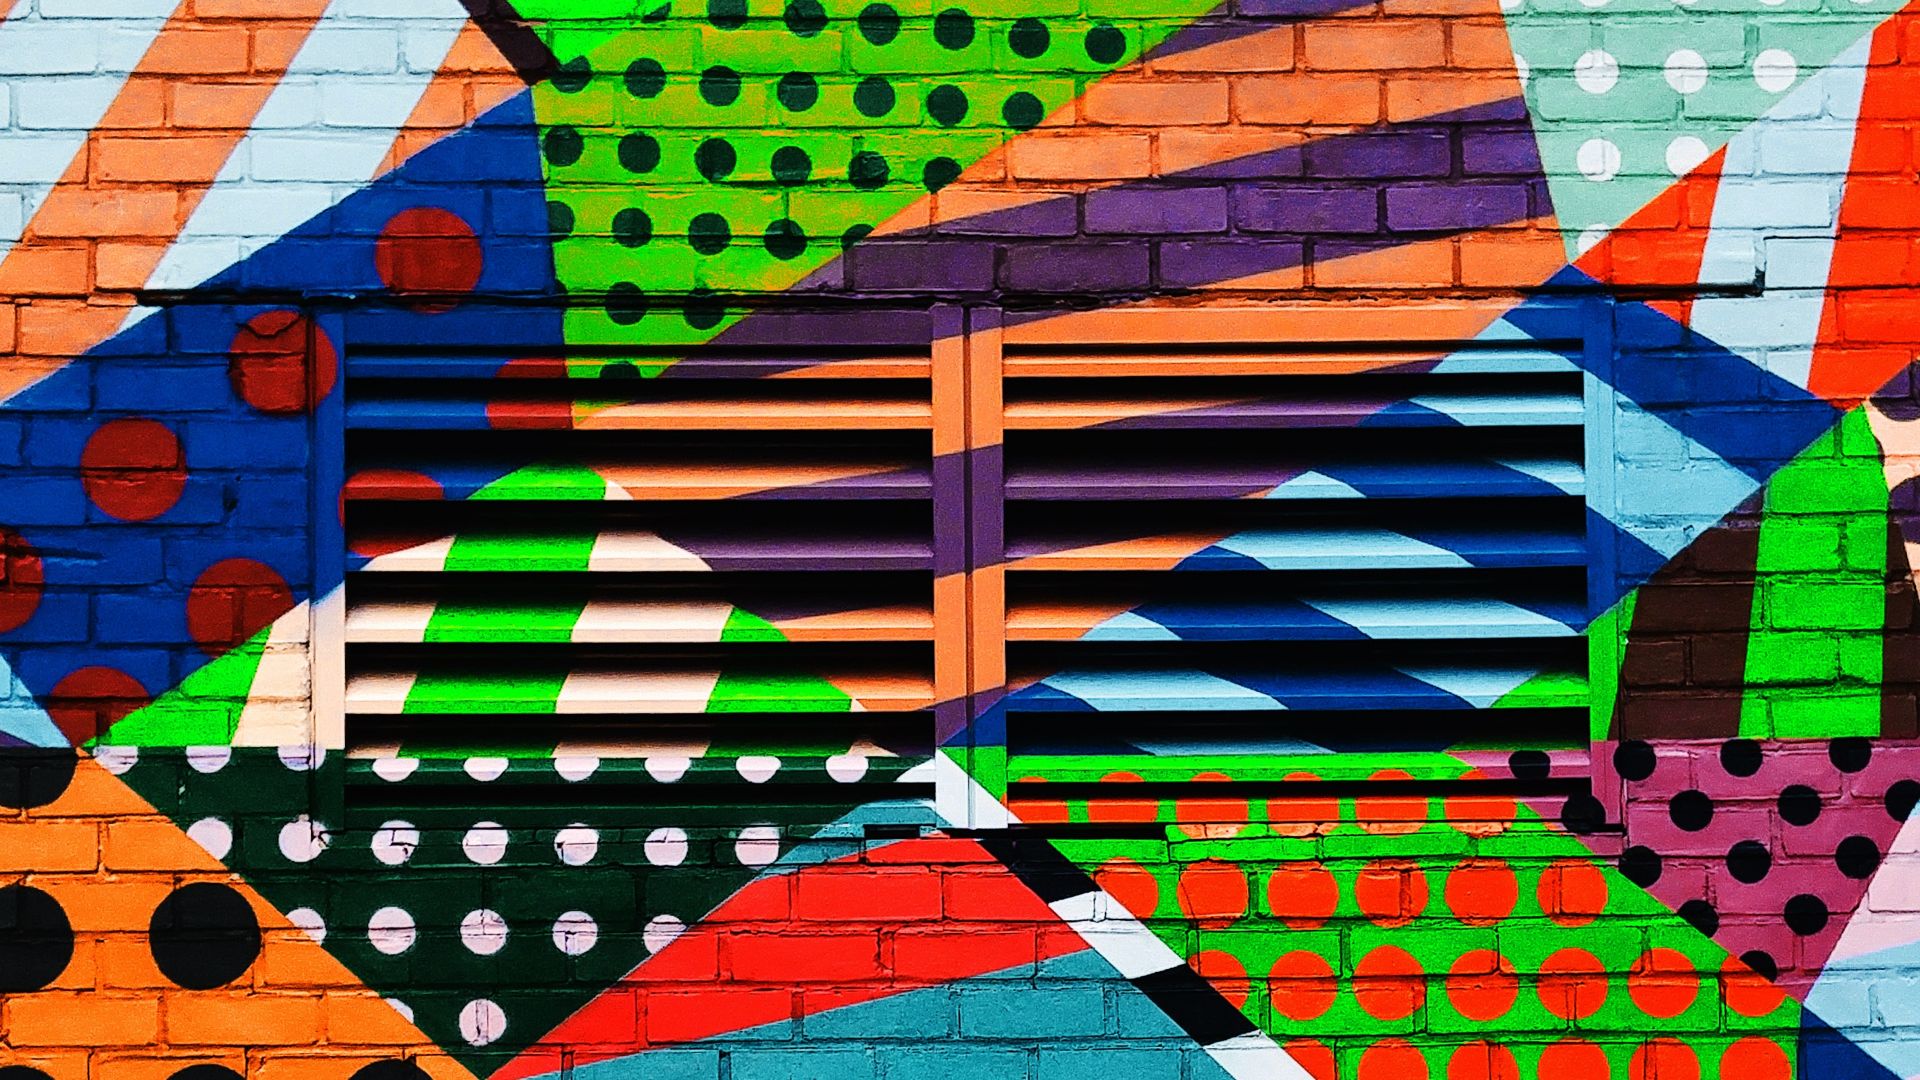 A collage of brightly colored, geometric patterns painted on a brick wall with vents.